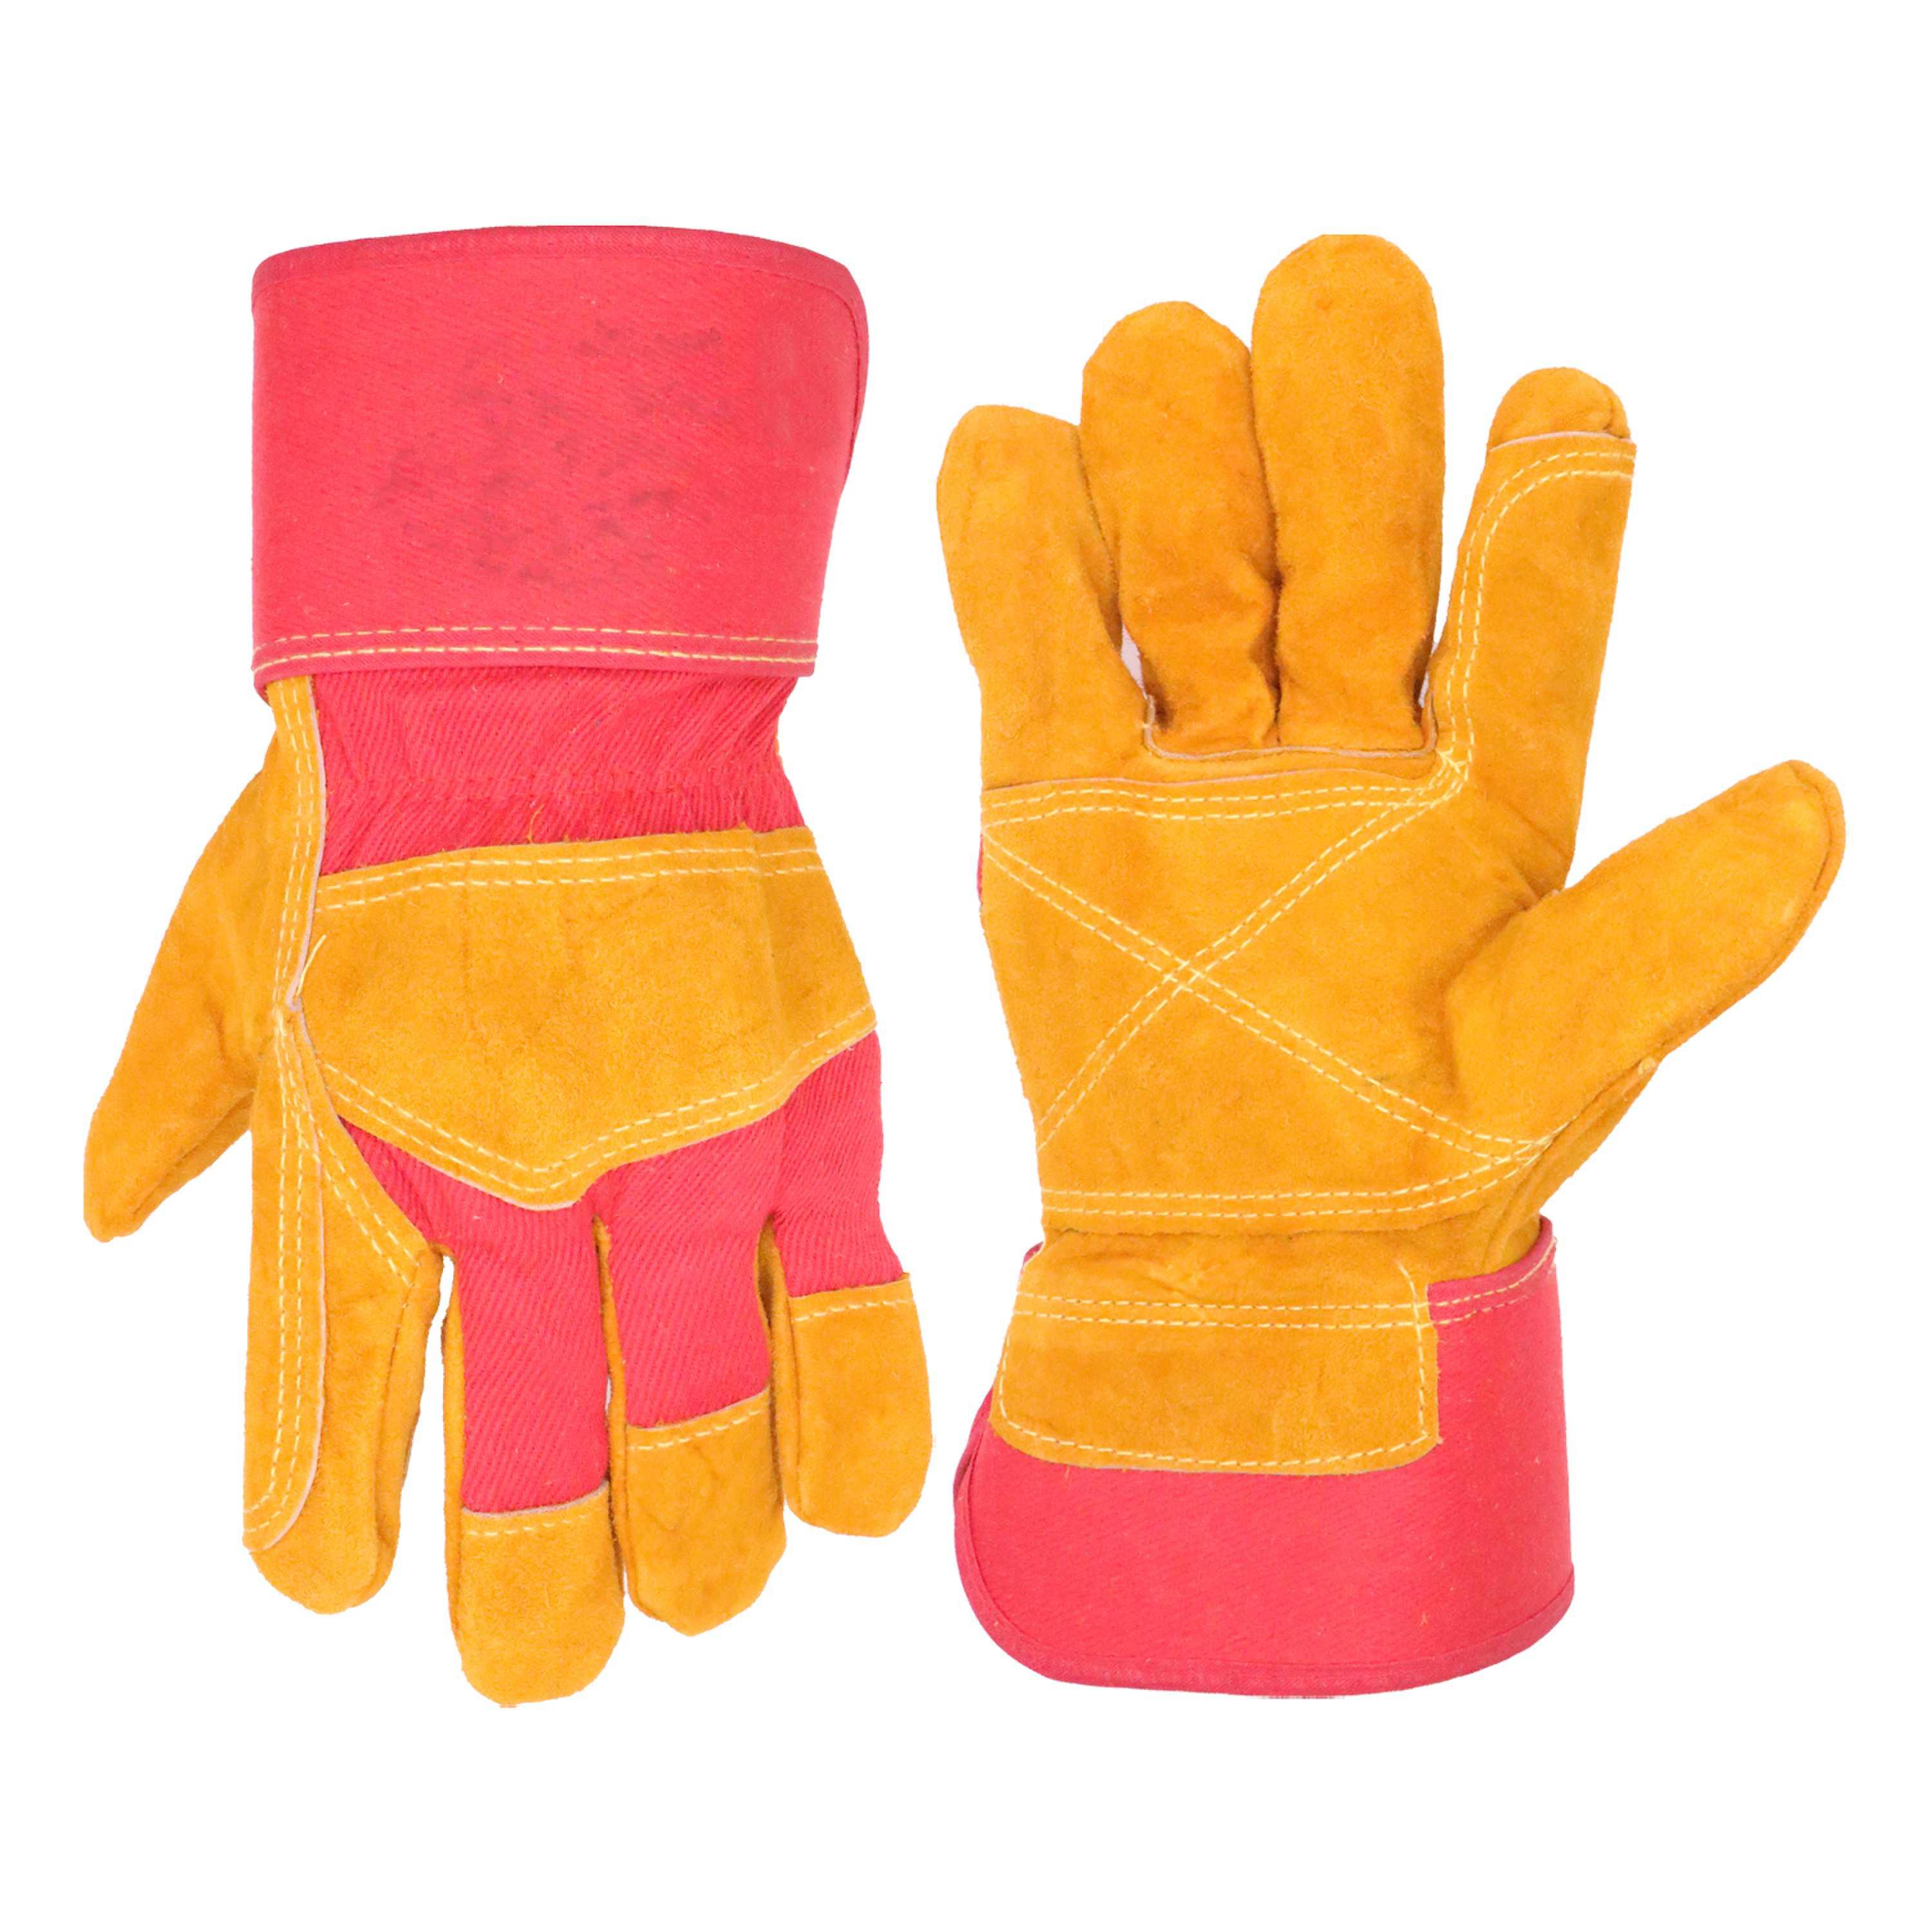 750 PRISAFETY Split Cowhide Leather Gloves winter work cotton back gloves rubberized safety cuff gloves